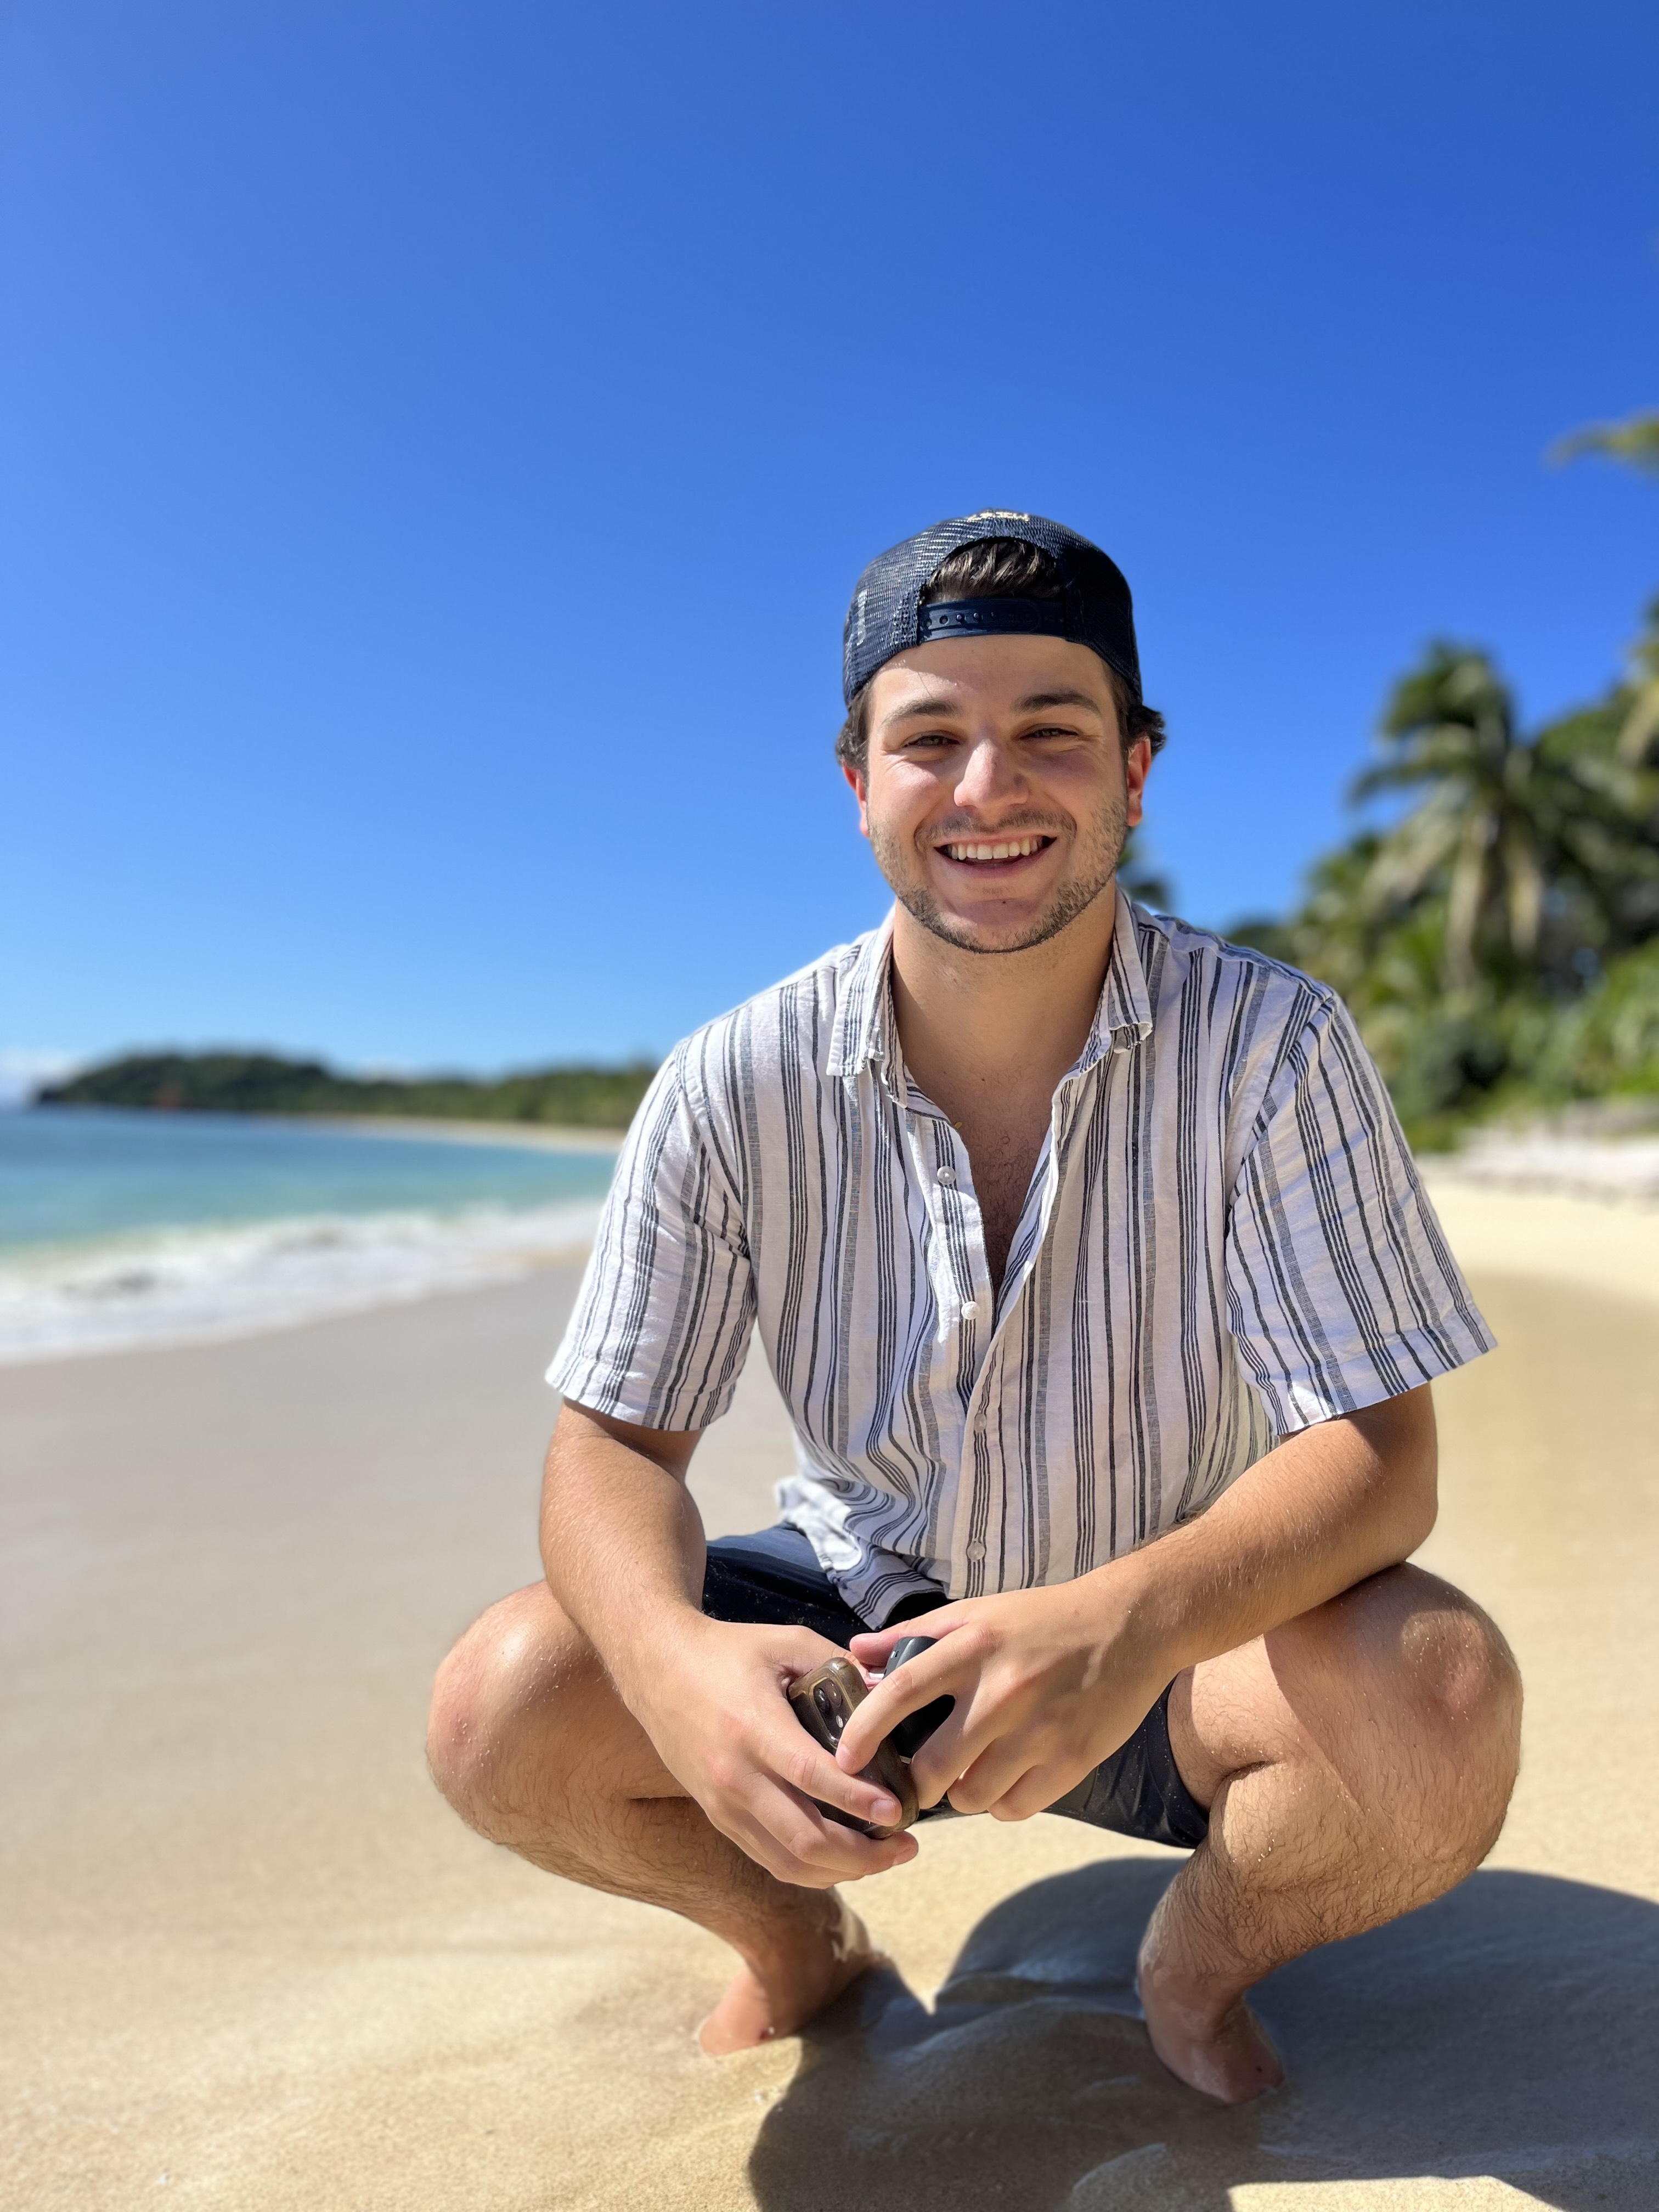 Recent graduate hired to work on the set of 'Survivor'